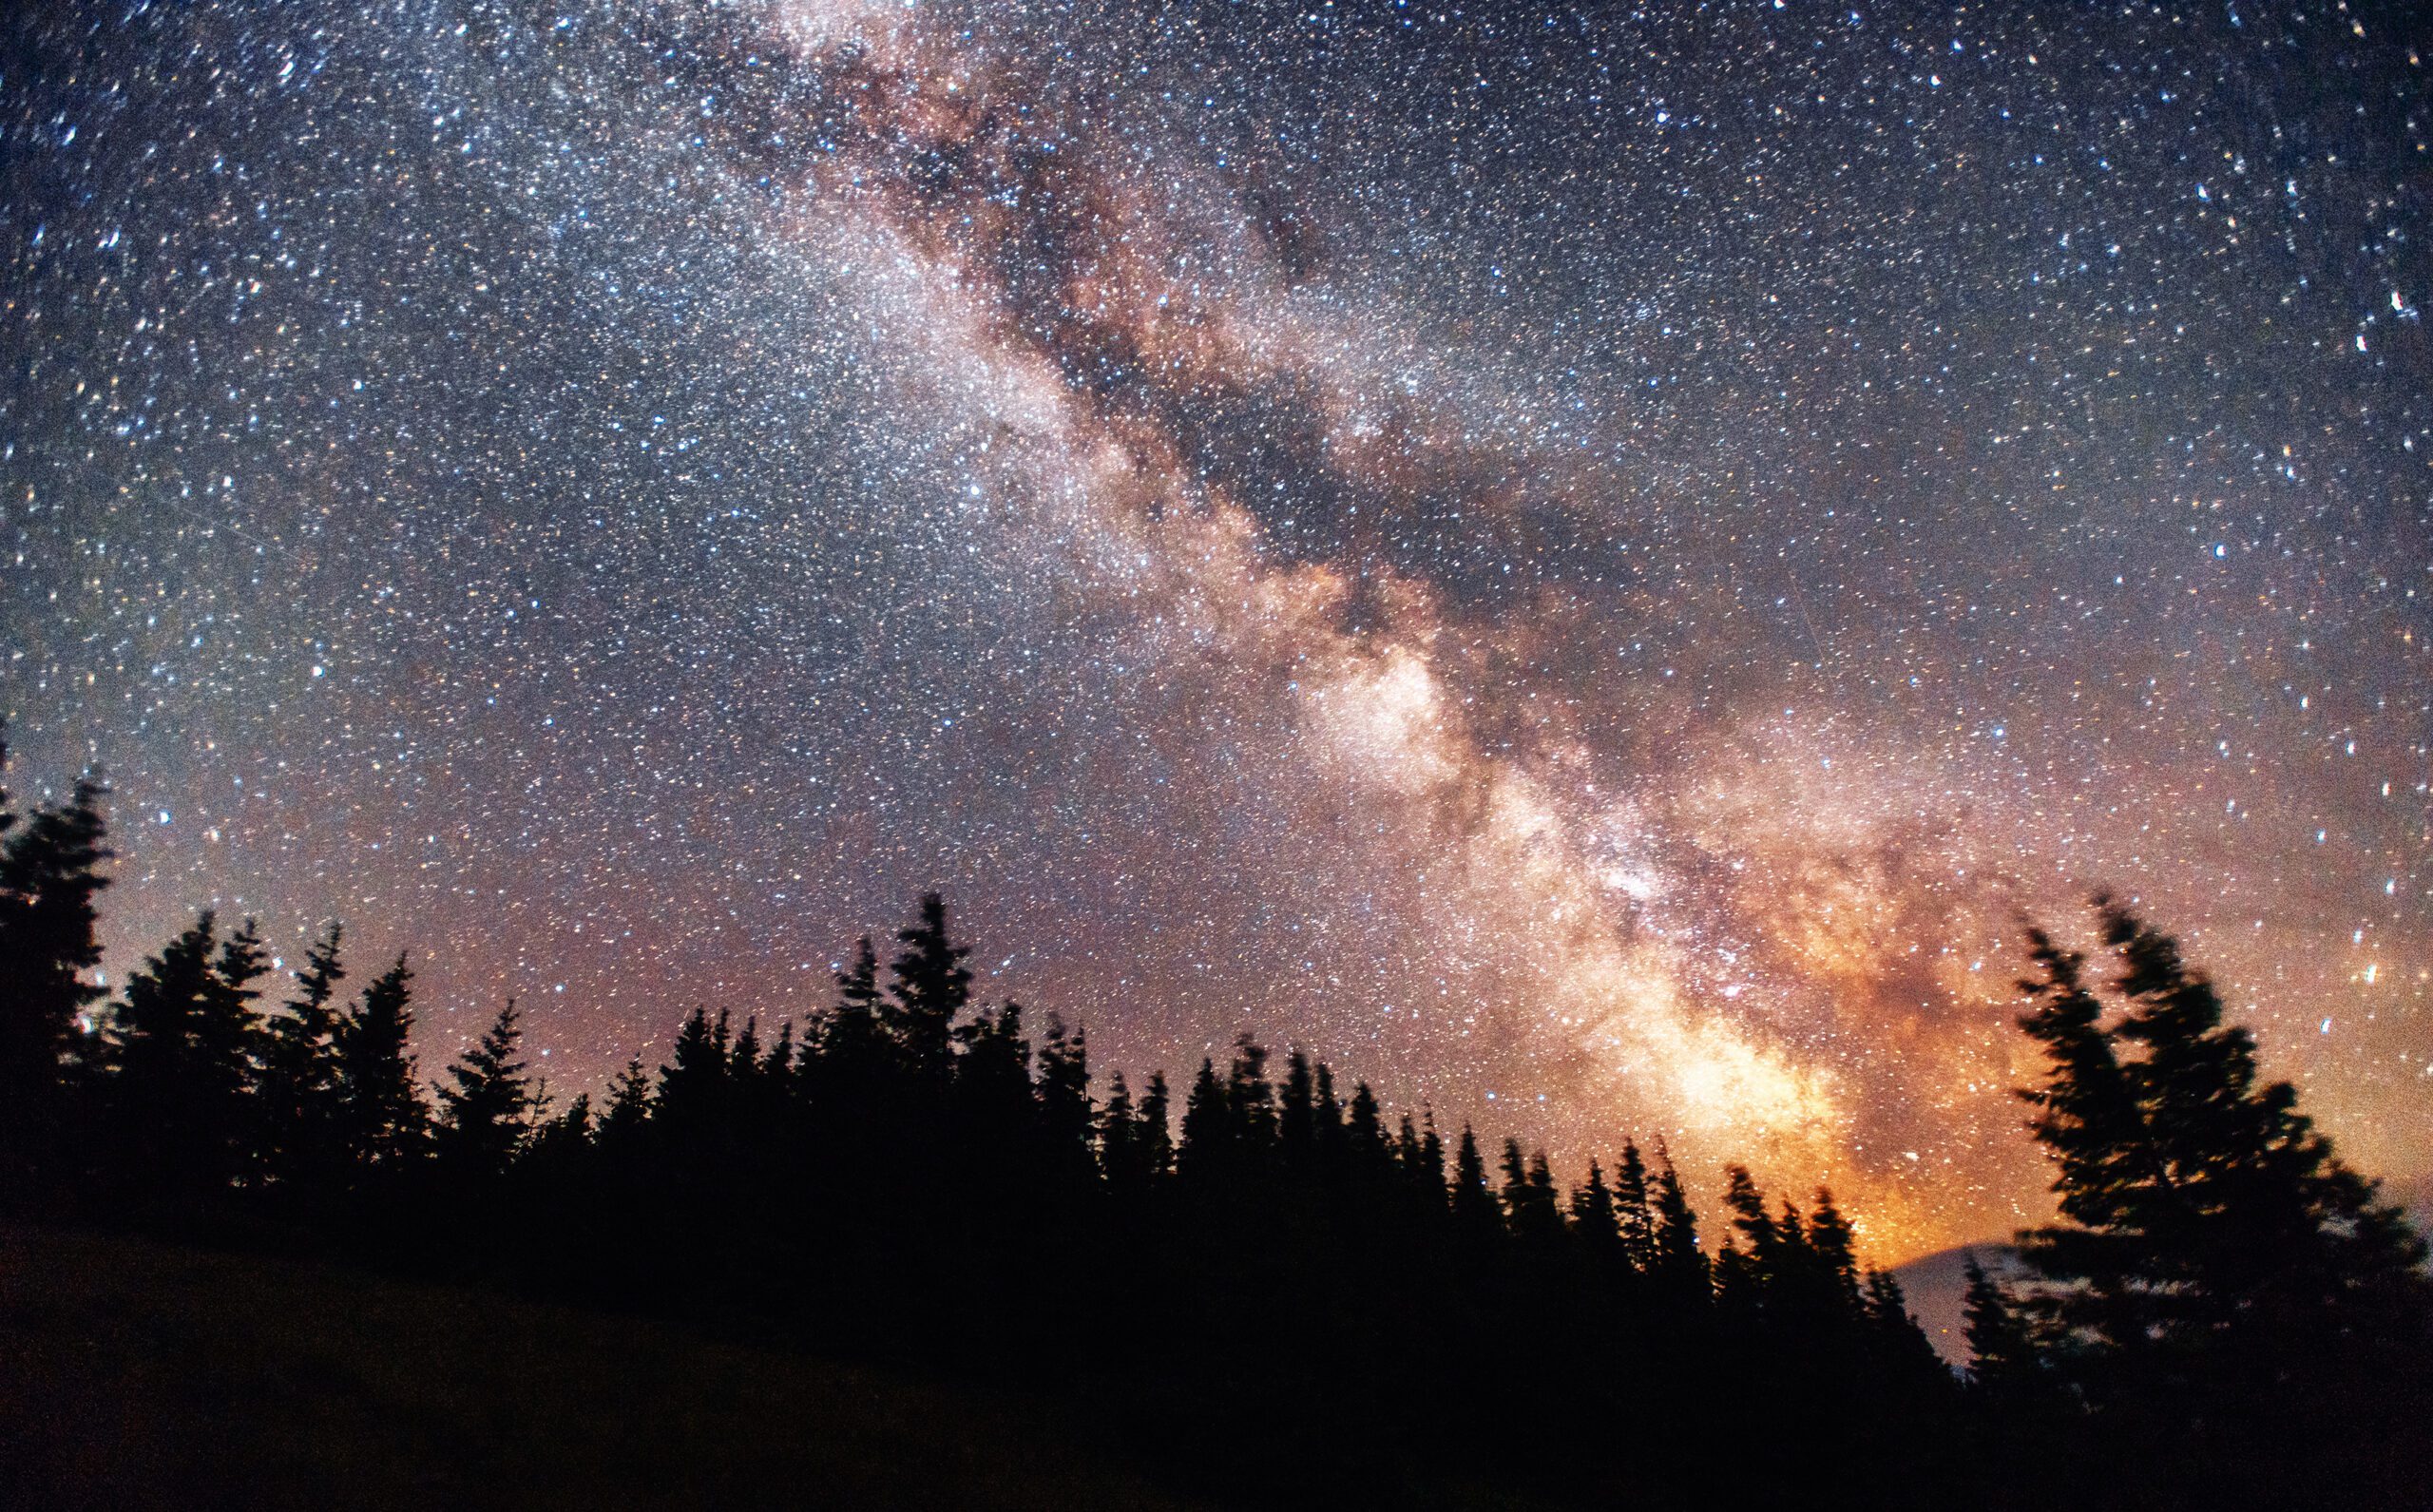 Astrophotography 101: Capturing the Night Sky With Your Smartphone -  Discovery Place Science Museum